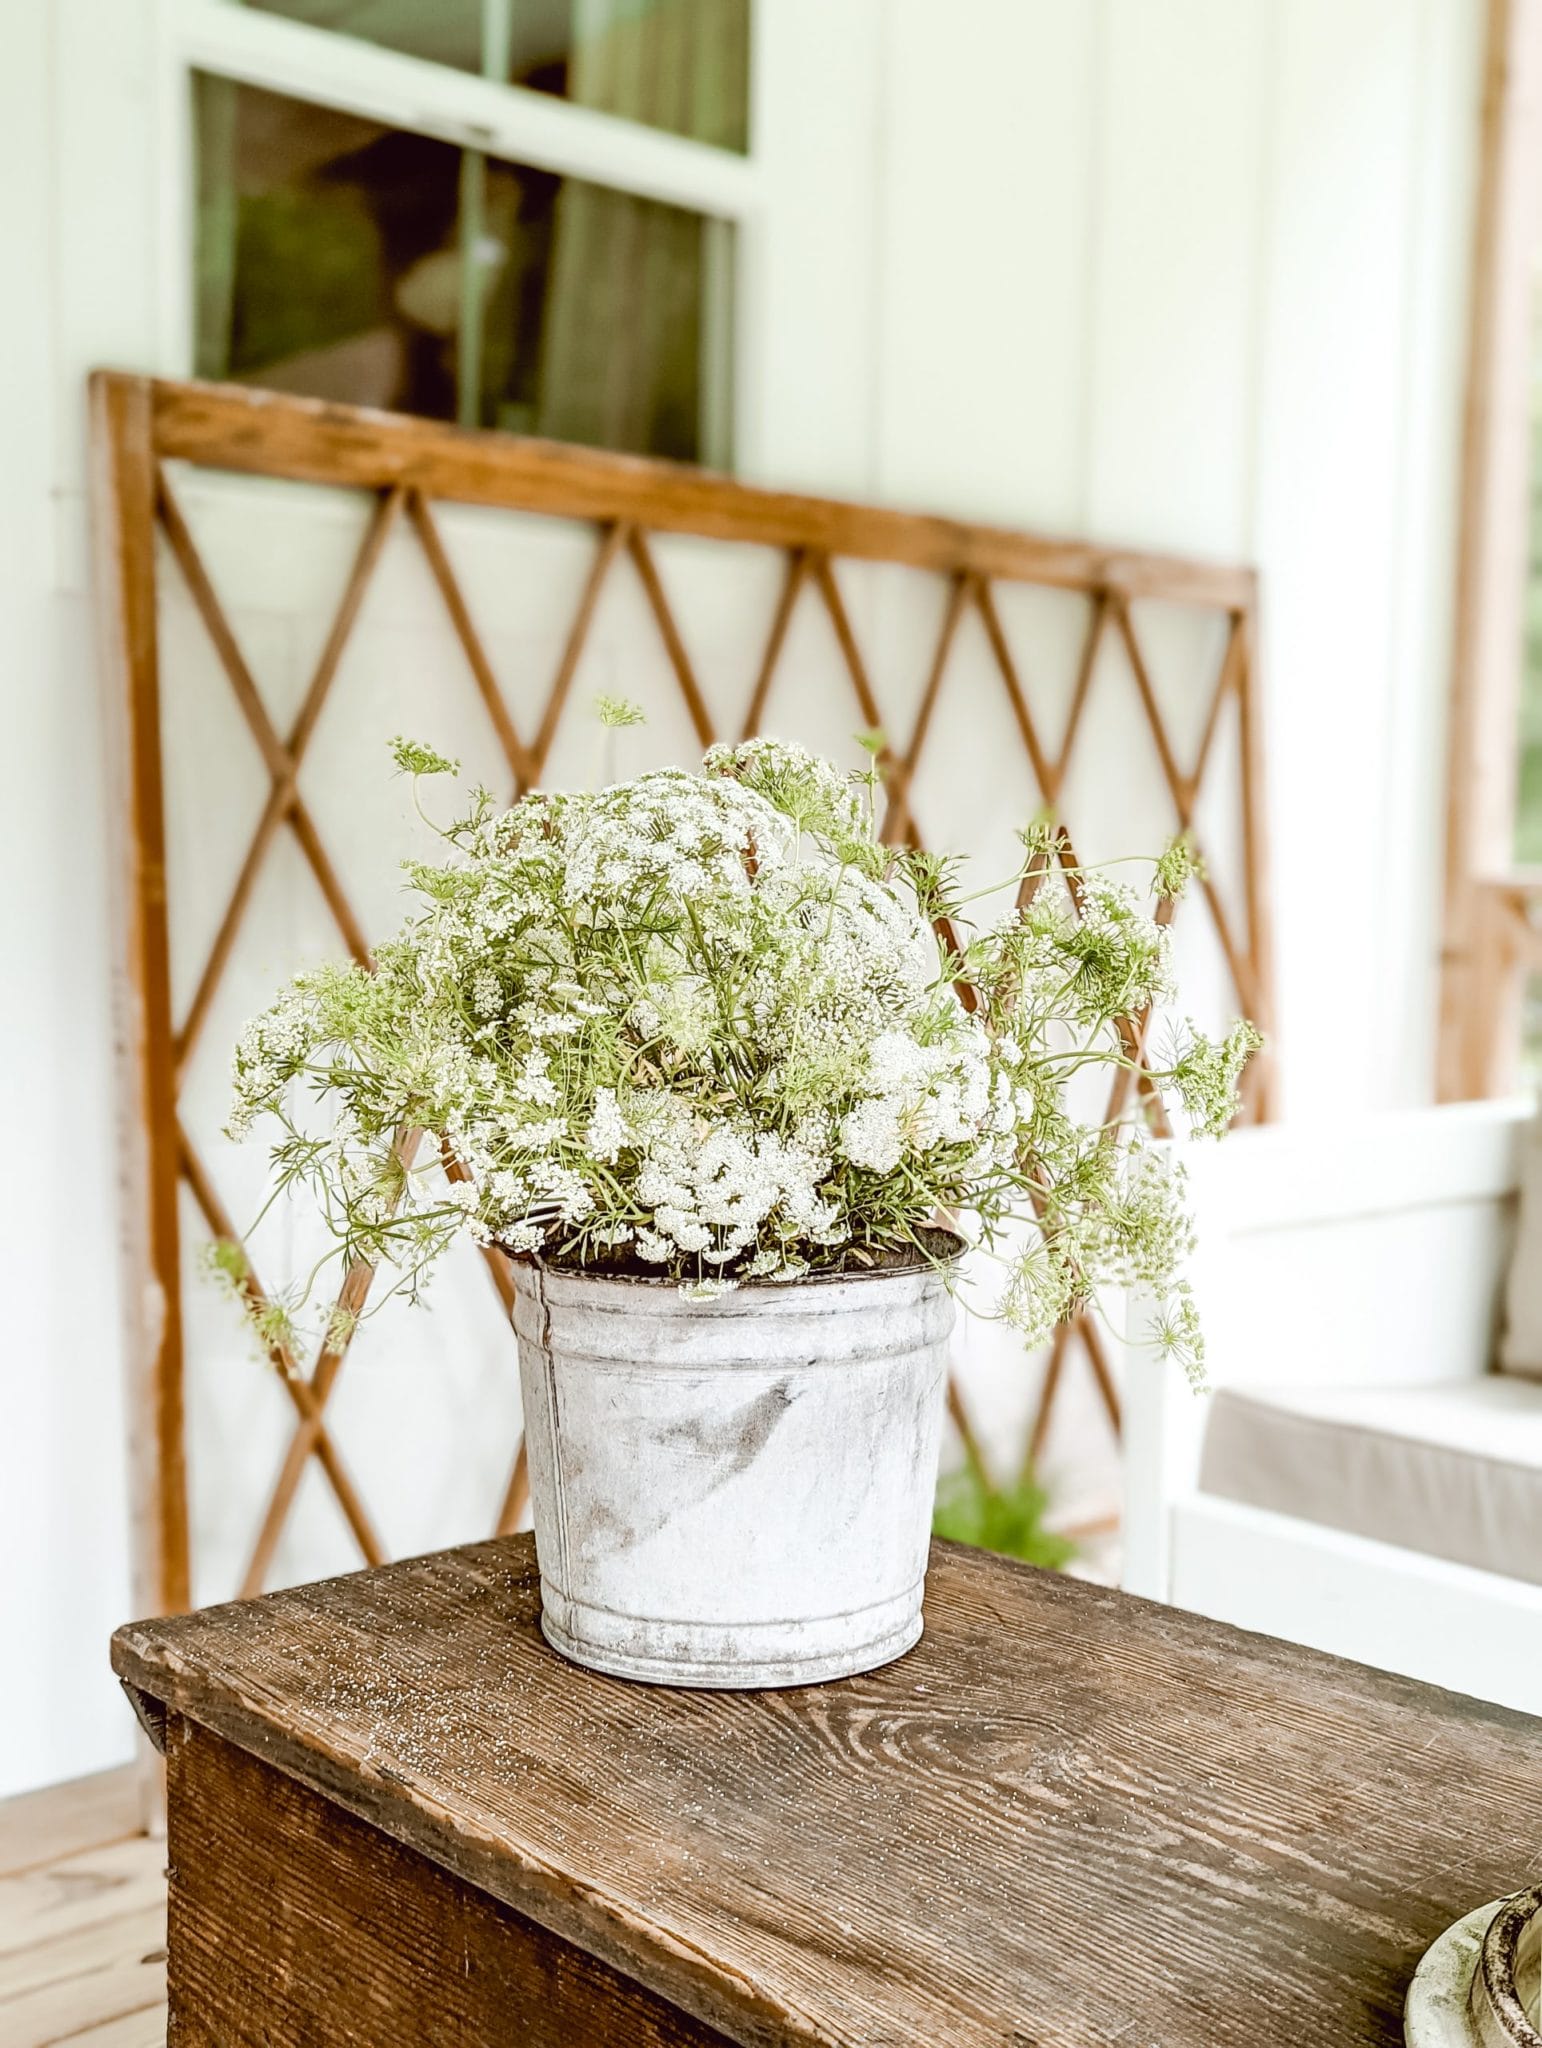 galvanized bucket with fresh cut queen anne's lace flowers